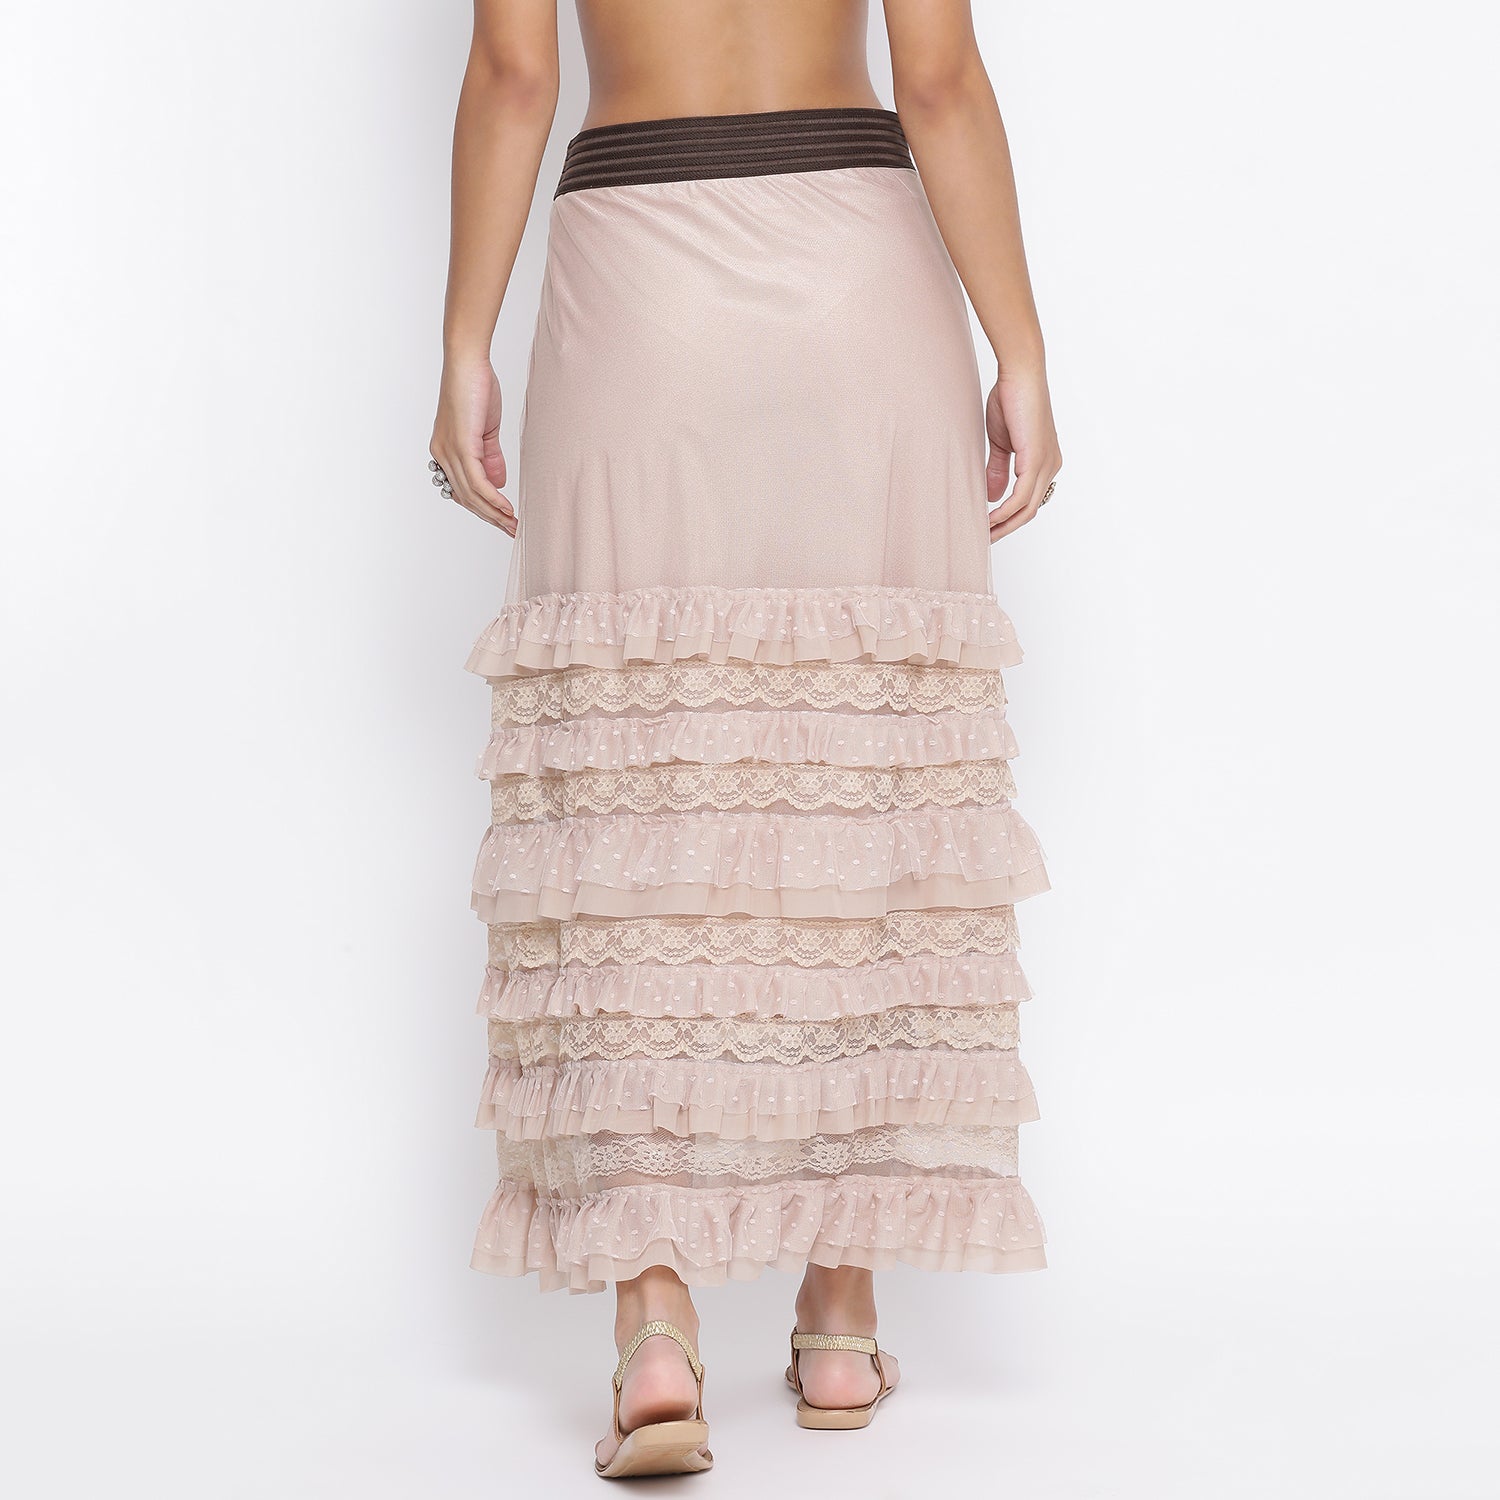 Beige Net Skirt With Brown Elastic And Frills